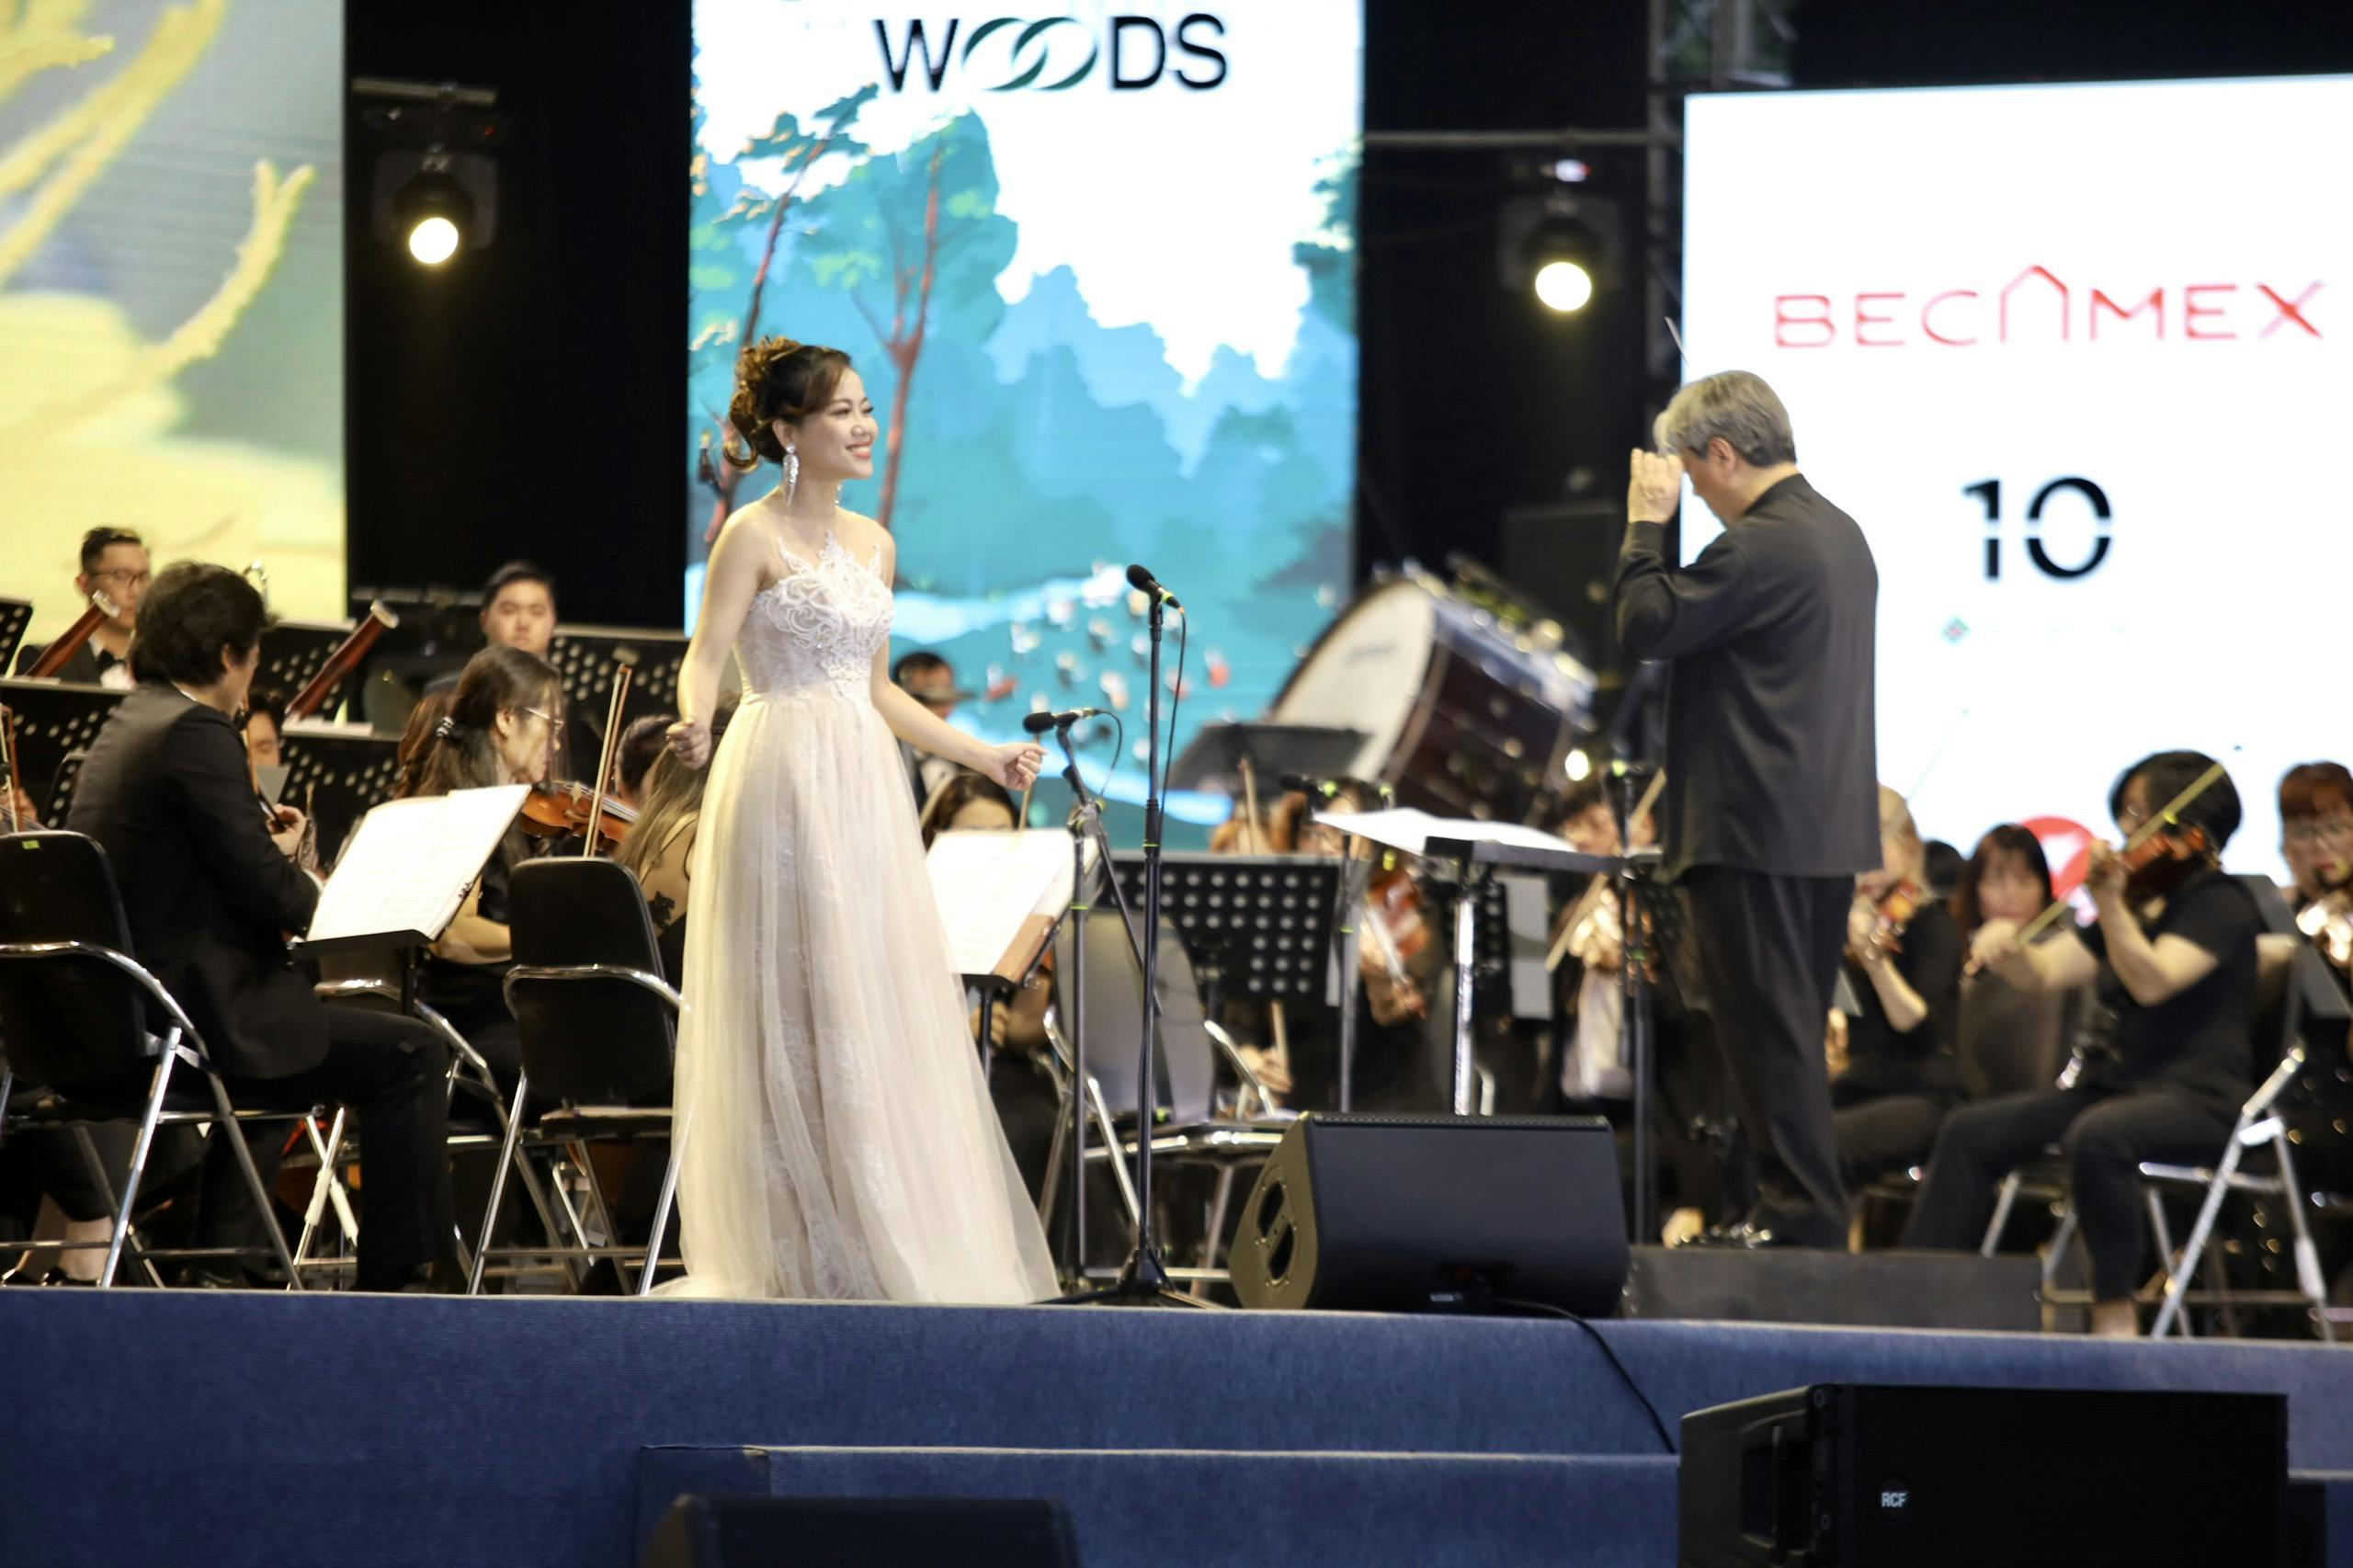 "Binh Duong New City Symphony in the Woods" - A fulfill and meaningful night for celebrating New Year